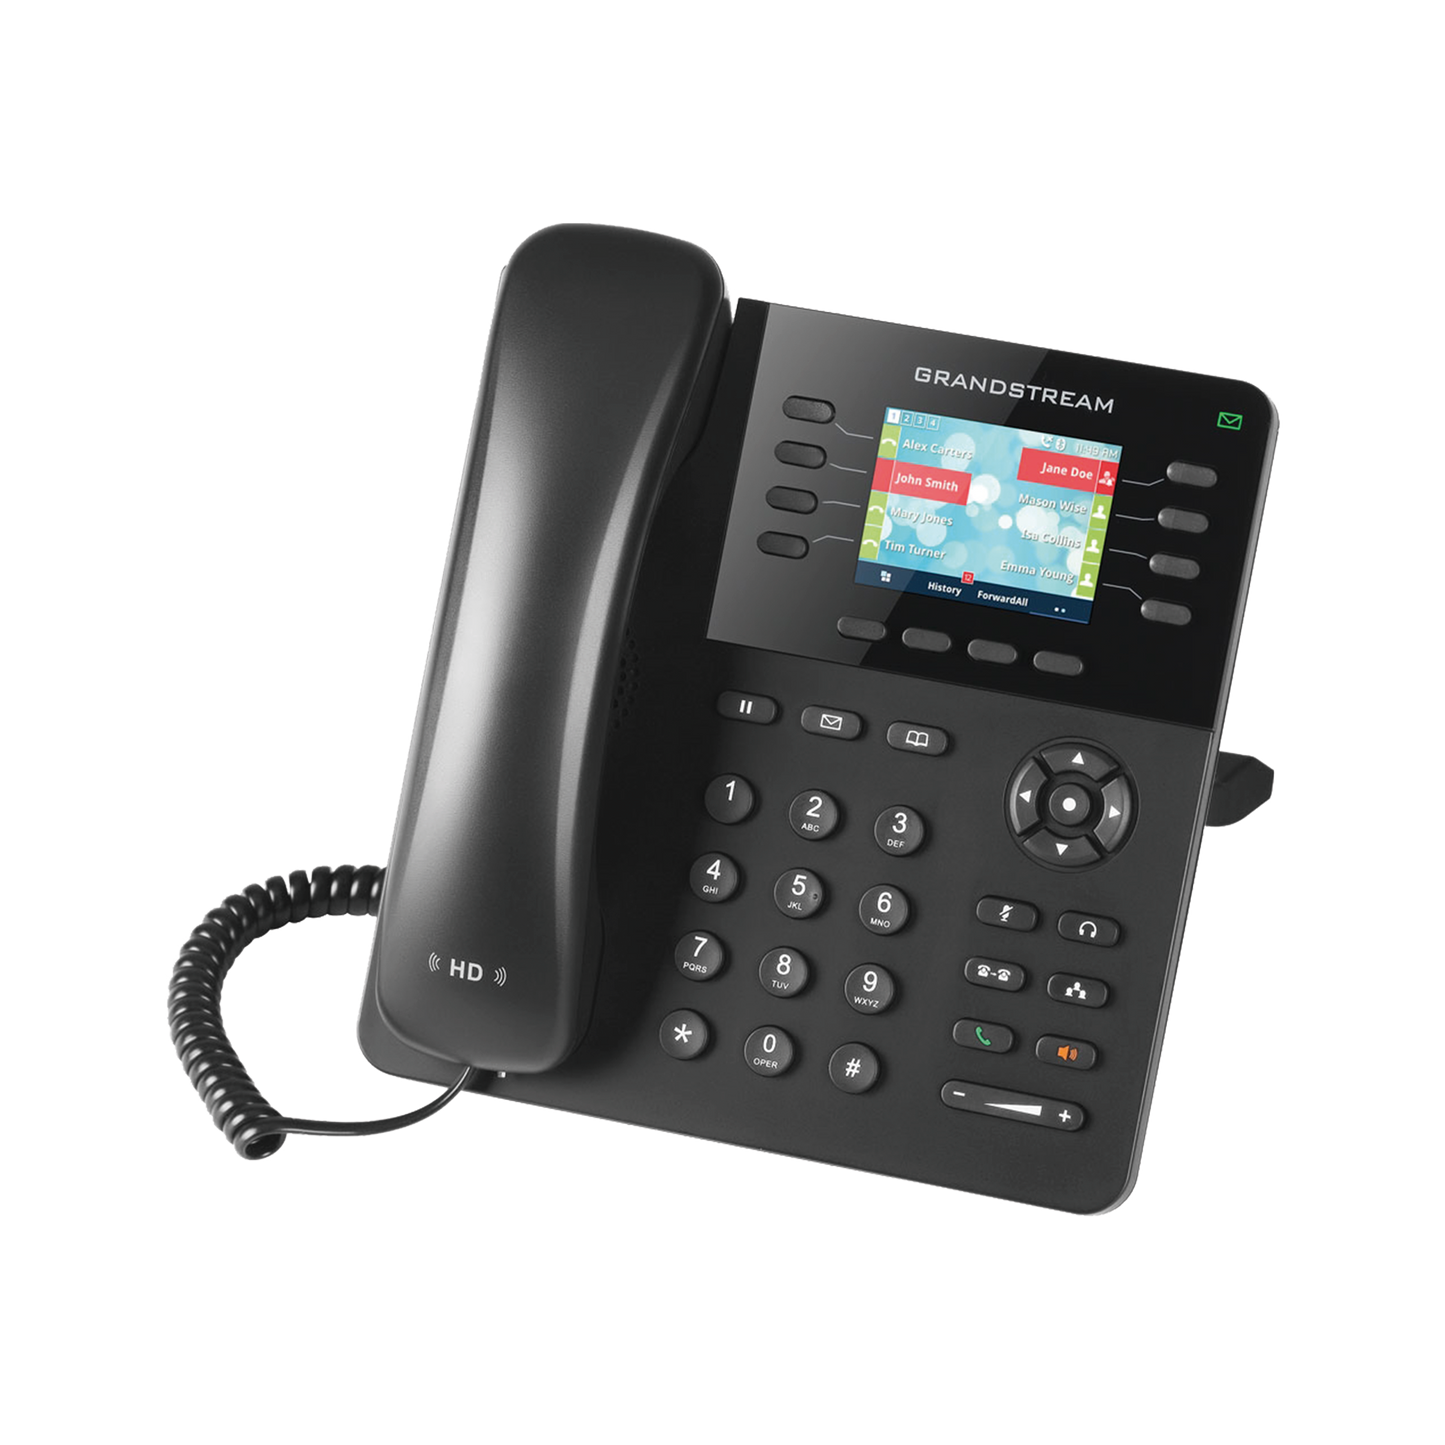 Enterprise IP Phone with Gigabit Speed, Supports 8 Lines VoIP & 4 Function Keys